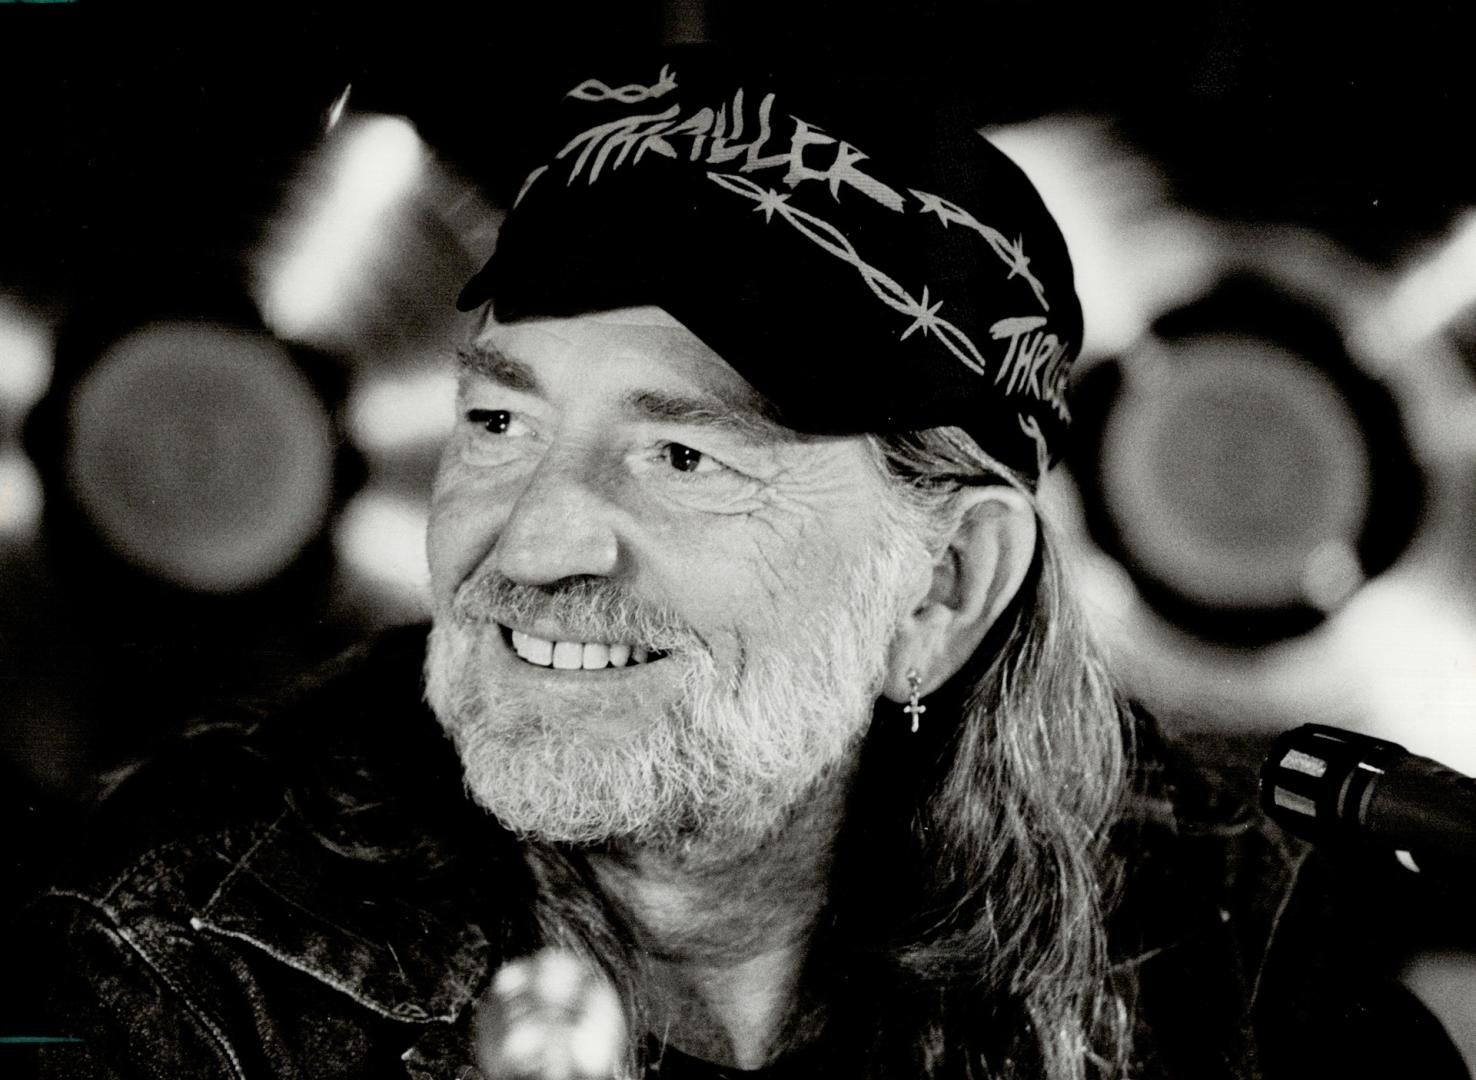 Willie's looking wonderful. Willie Nelson, the pony-tailed king of country music, looked jaunty in a Michael Jackson Thriller cap when he was presente(...)